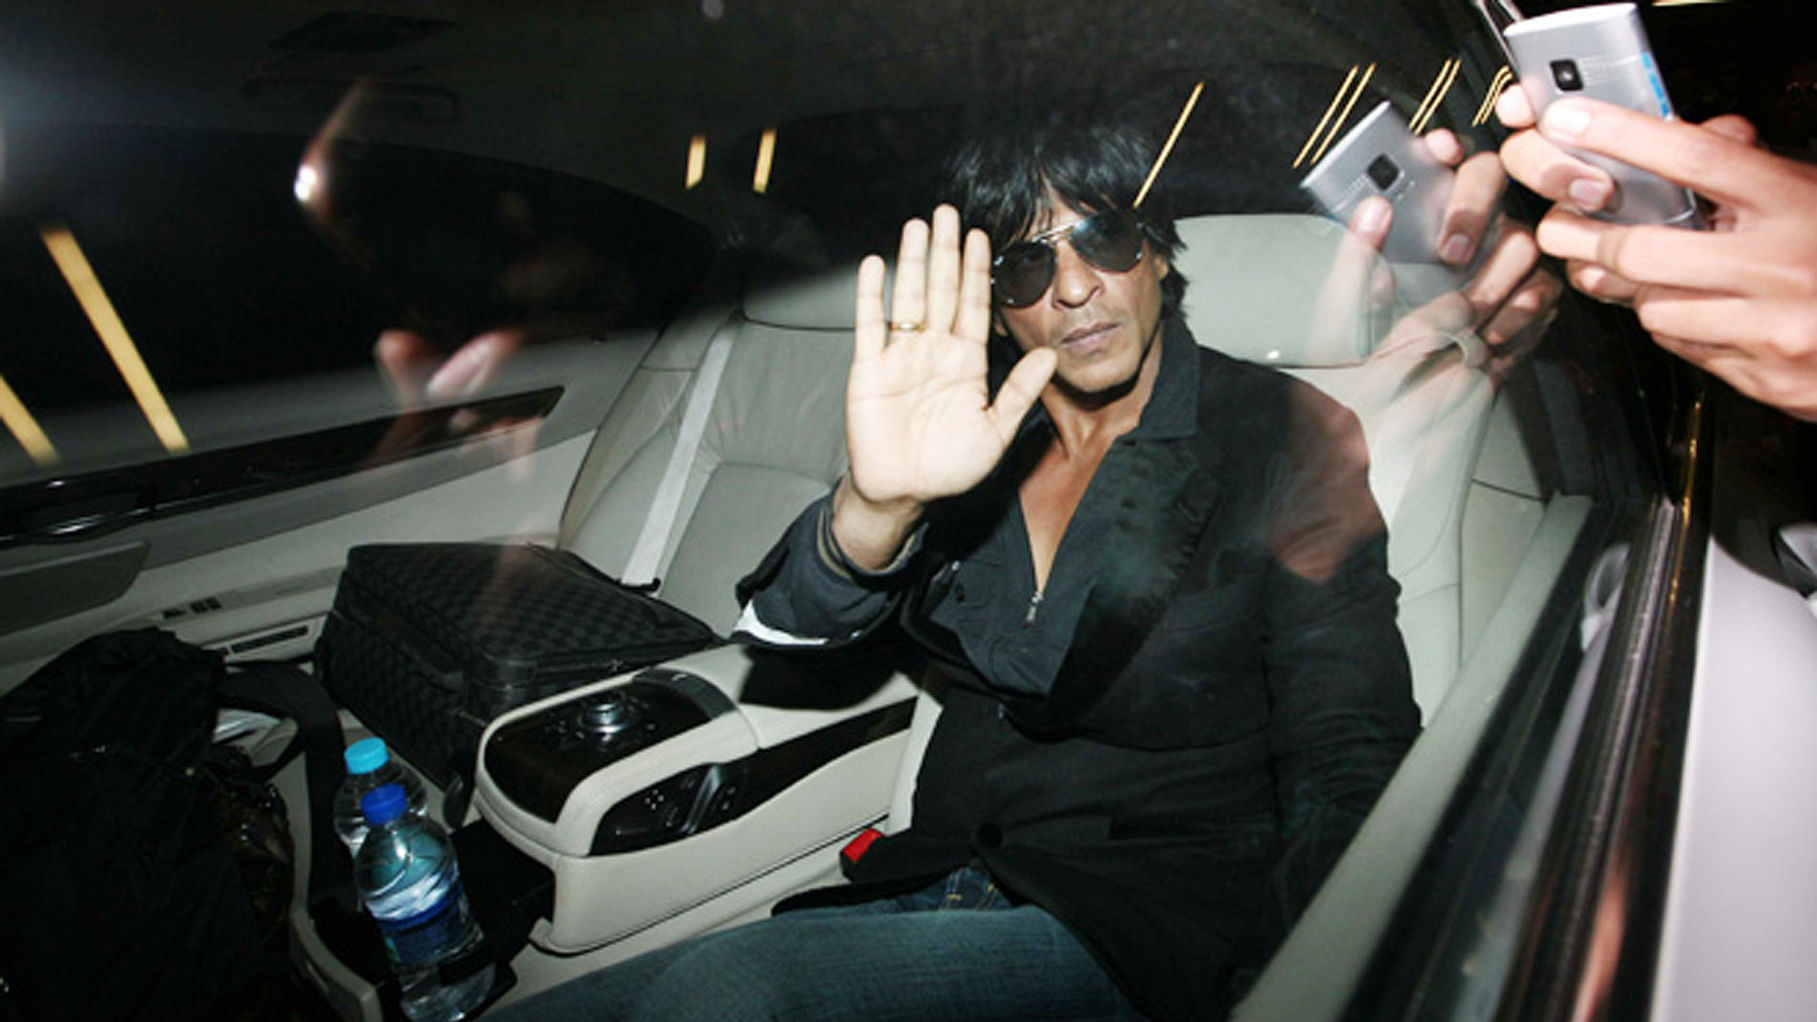 Shah Rukh Khan drives out of a promotional event (Photo: Yogen Shah)